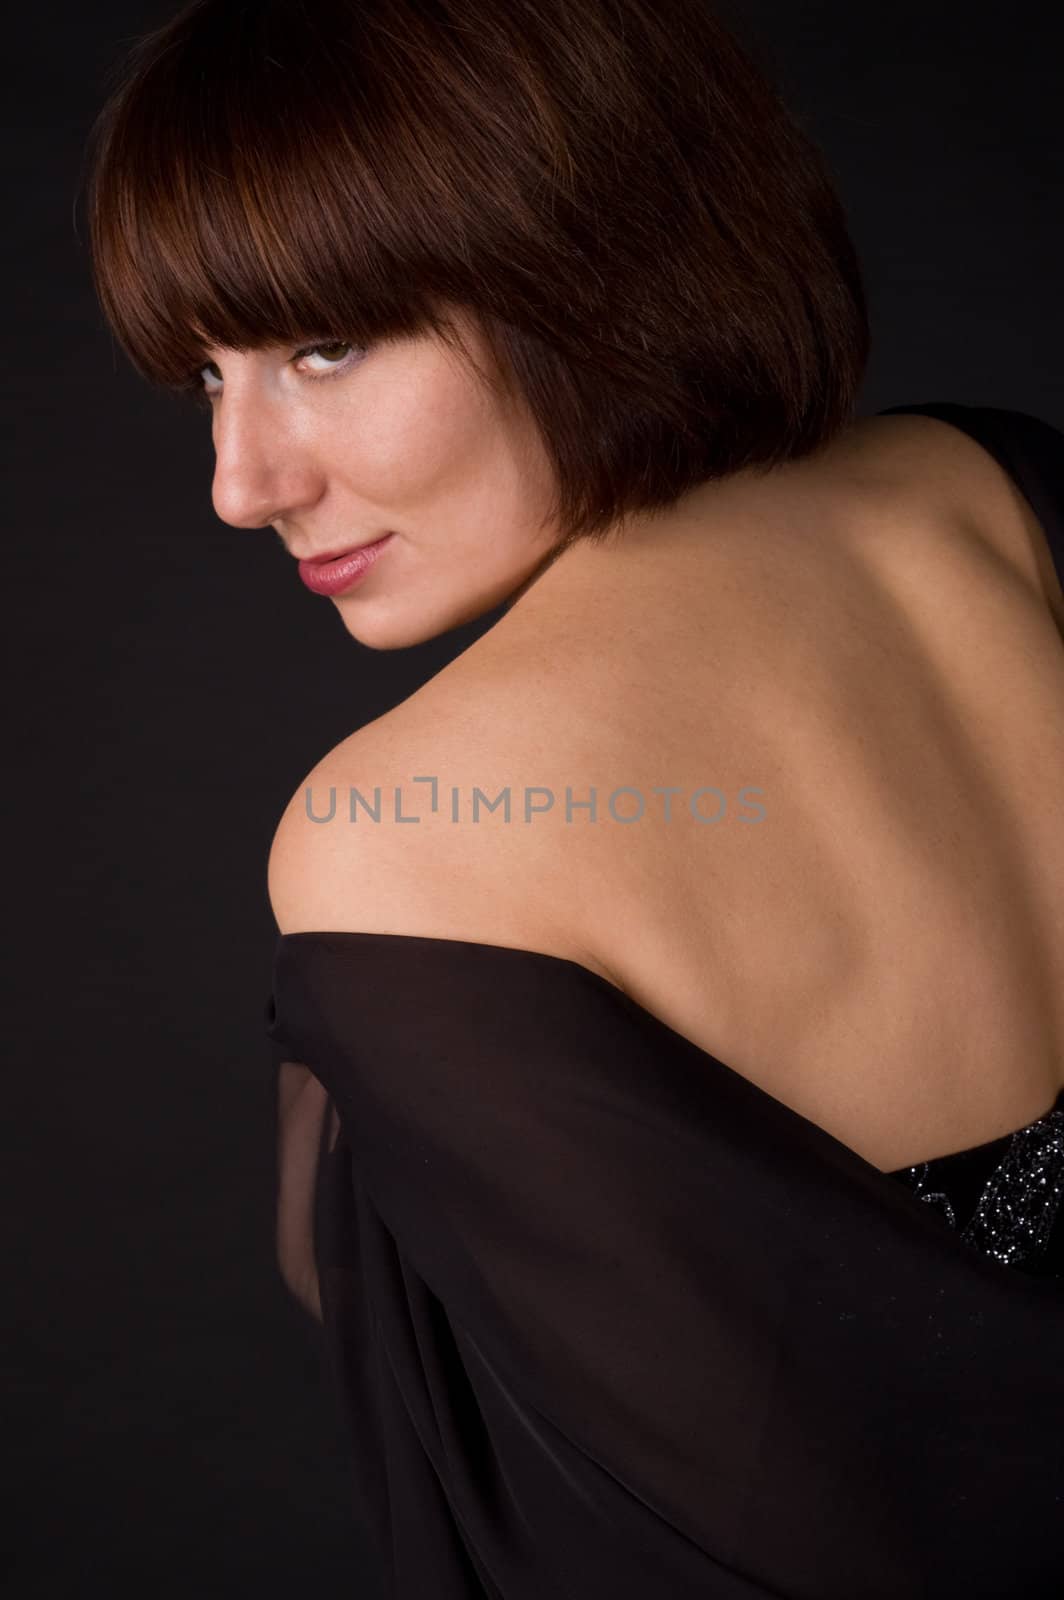 The woman in a dress on a black background